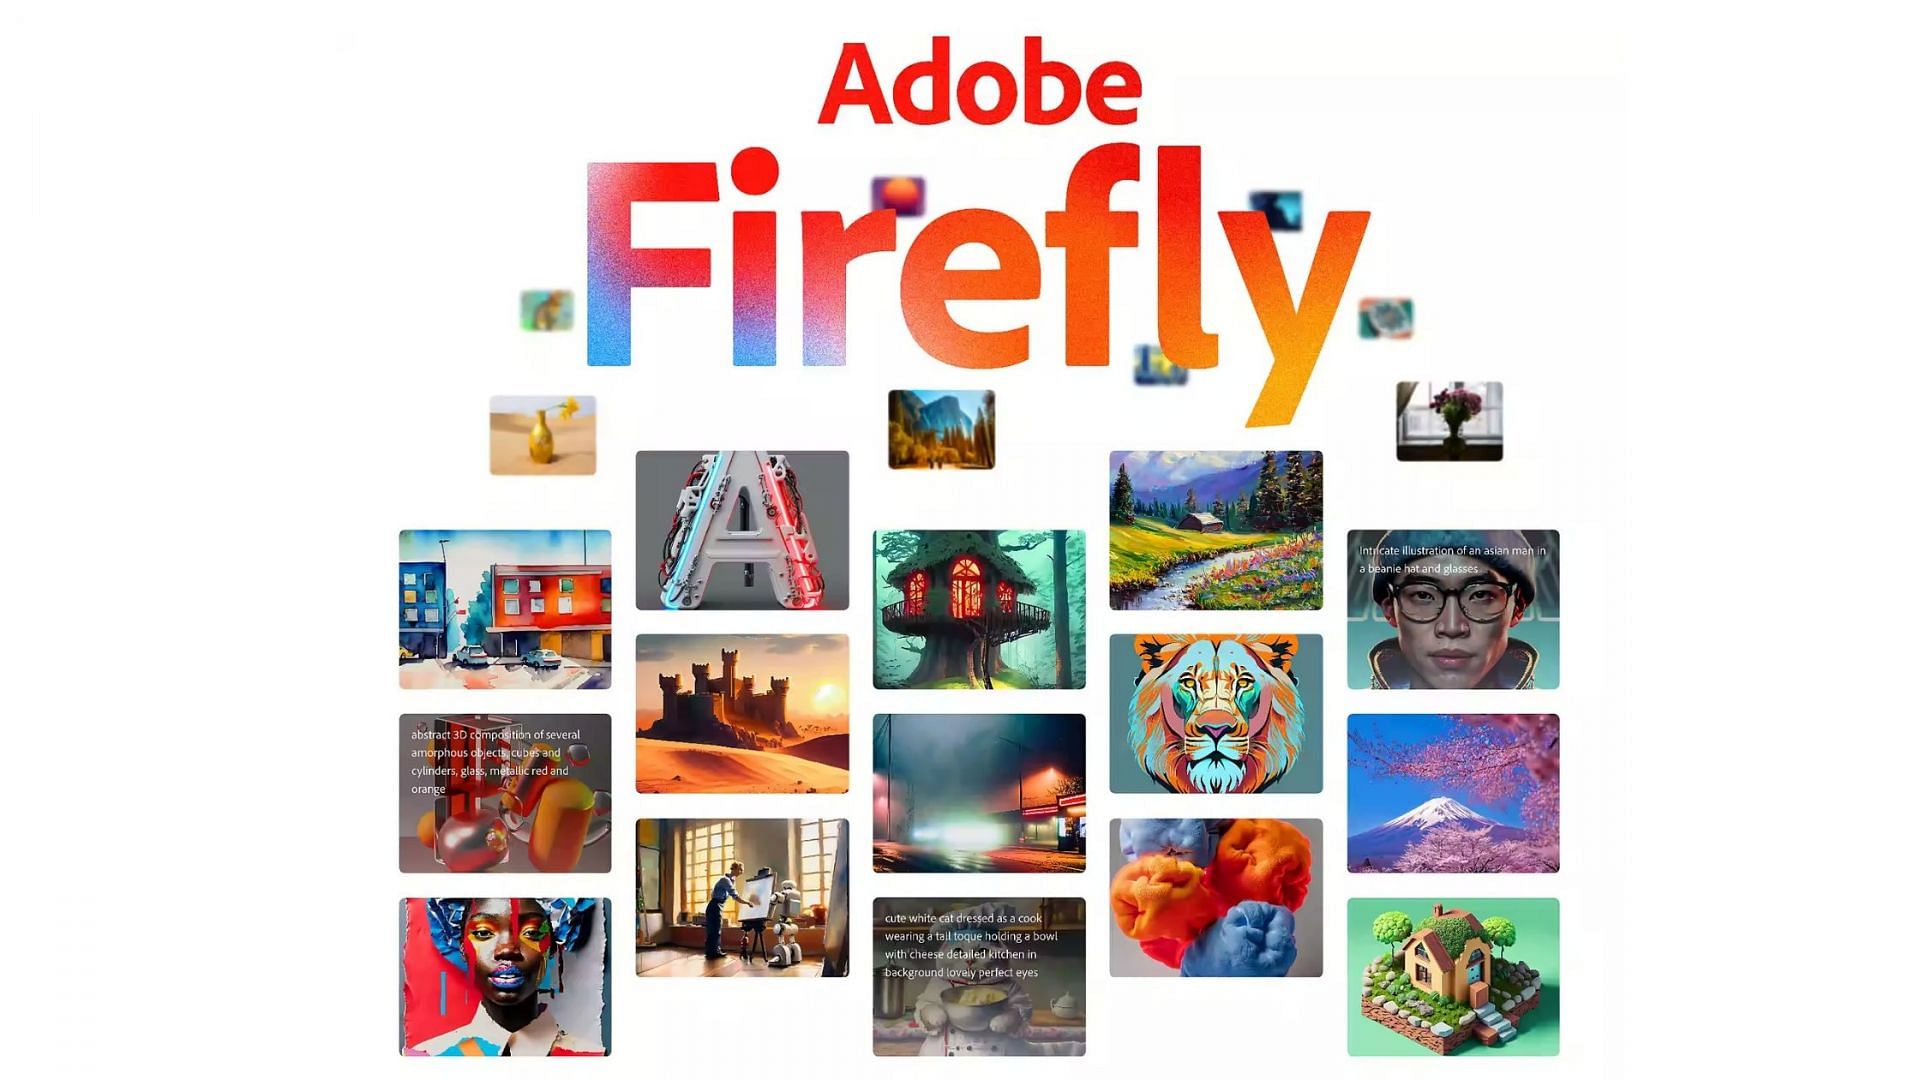 How to use Adobe Firefly to generate AI art